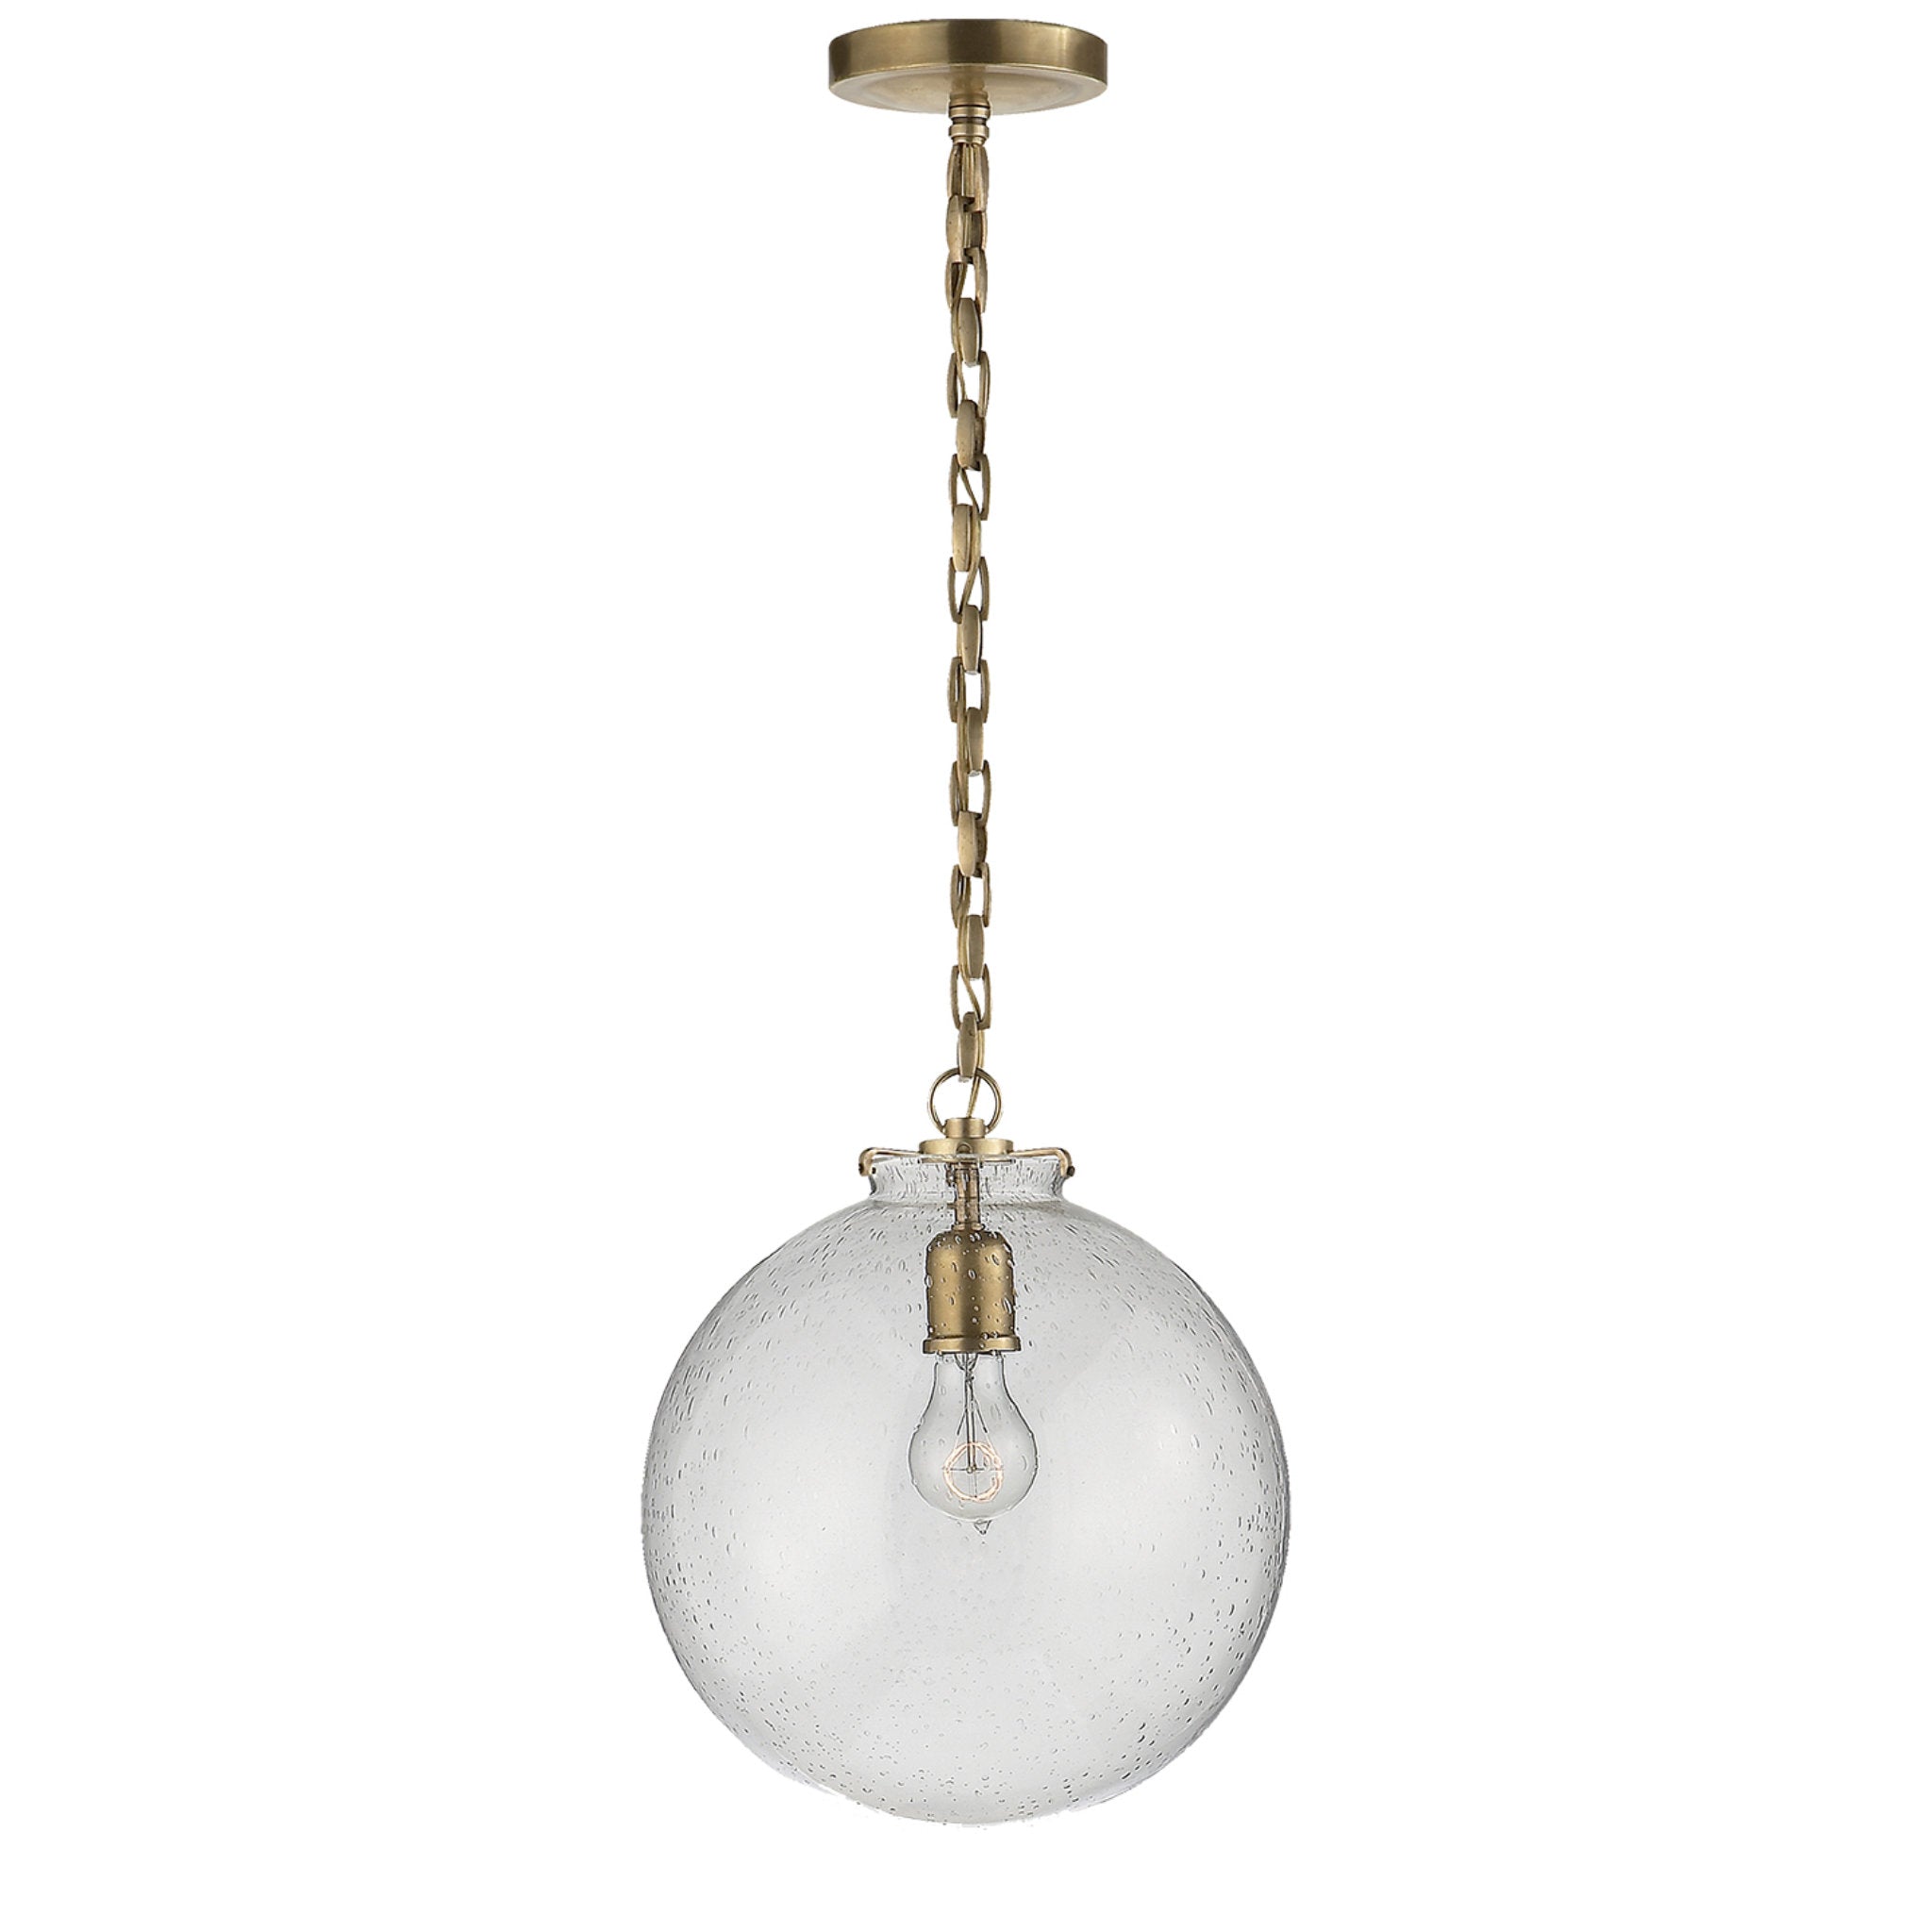 Thomas O'Brien Katie Globe Pendant in Hand-Rubbed Antique Brass with Seeded Glass